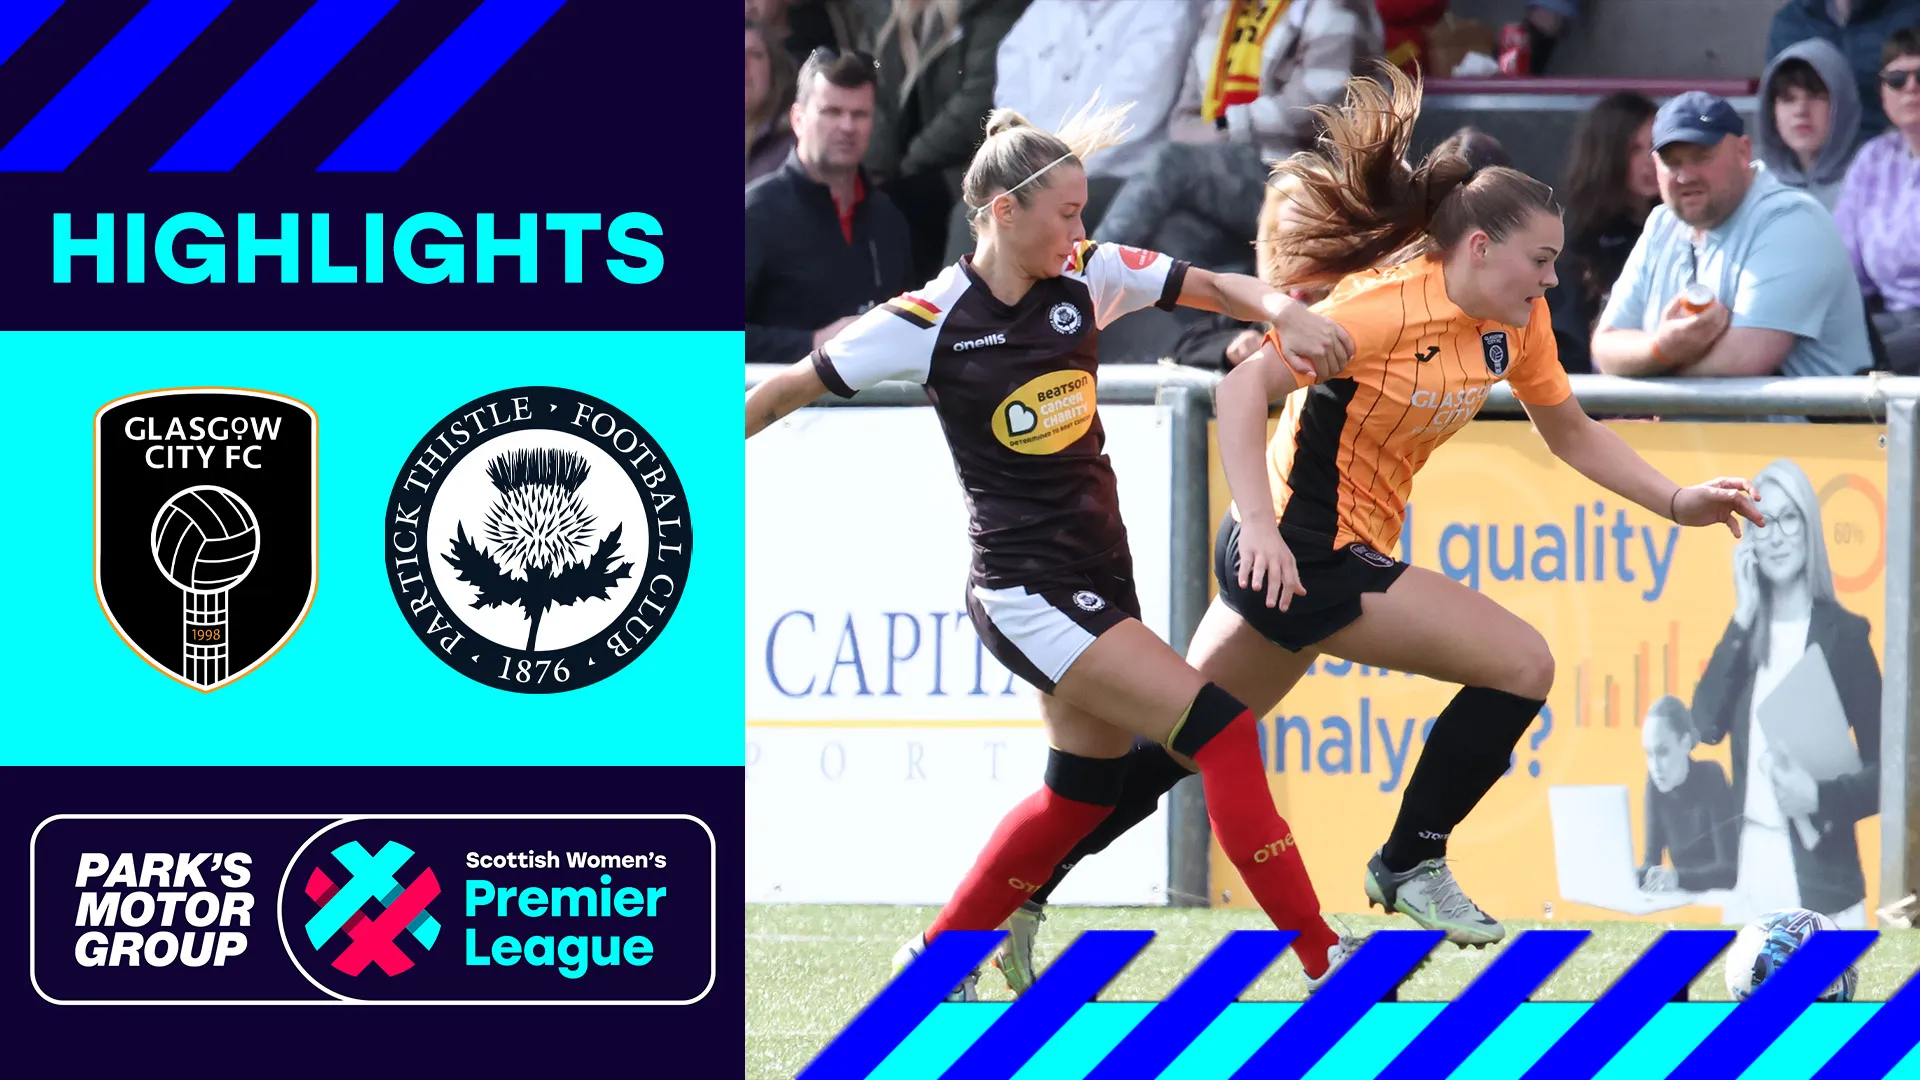 Image for Glasgow City 2-1 Partick Thistle | City remain two points clear at league summit | SWPL